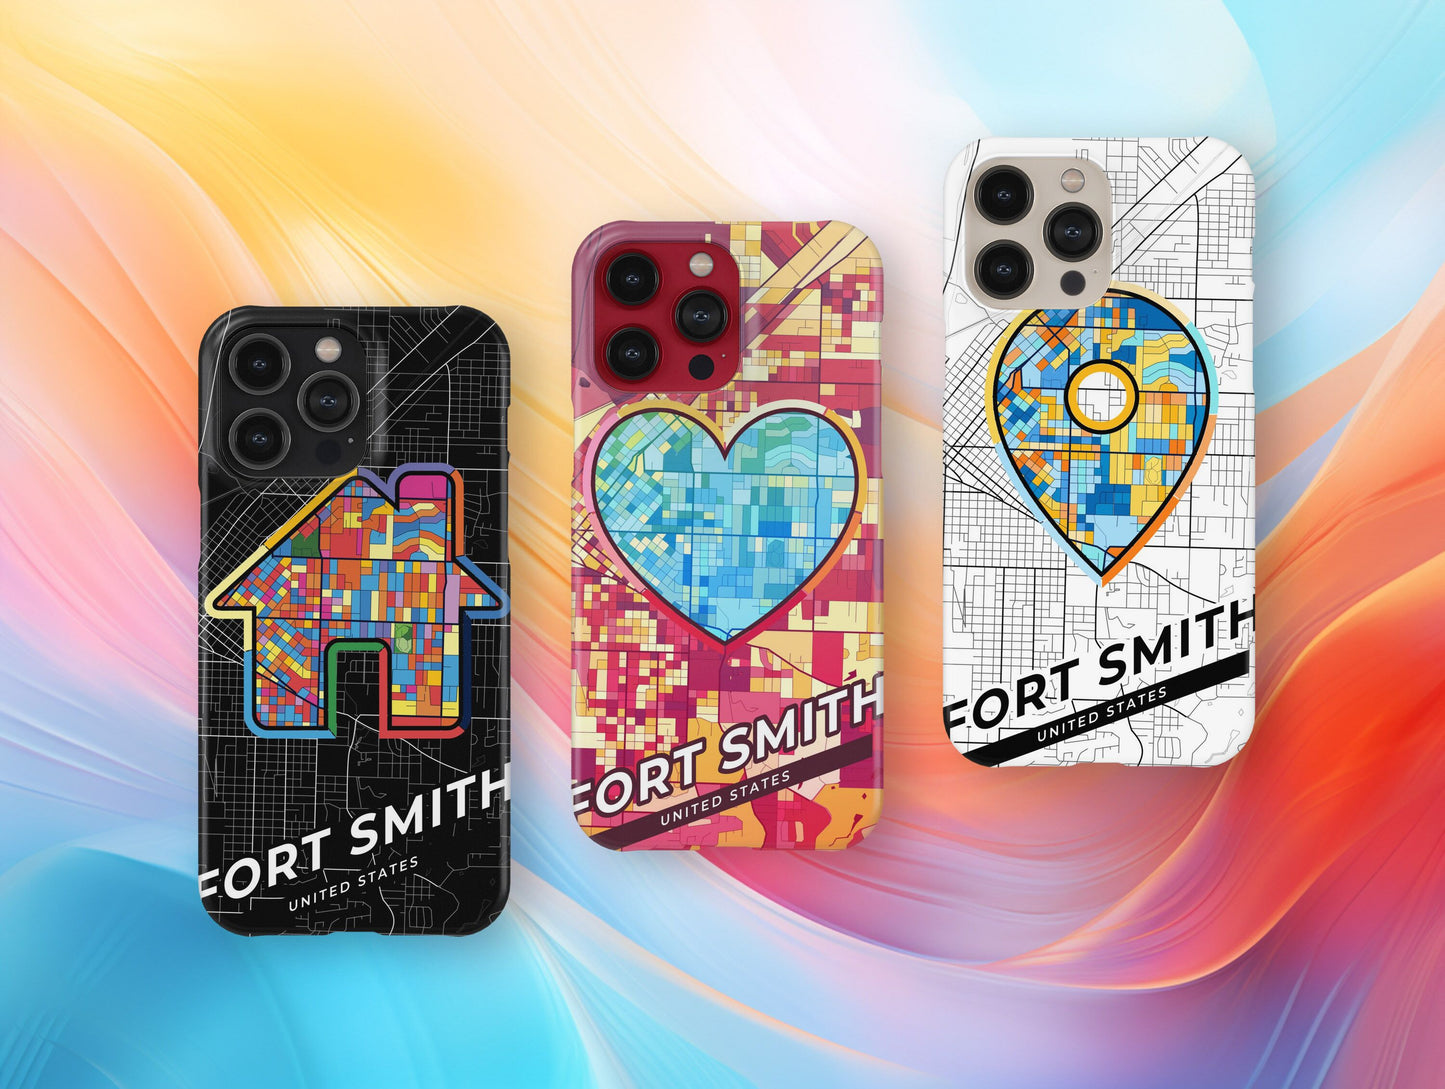 Fort Smith Arkansas slim phone case with colorful icon. Birthday, wedding or housewarming gift. Couple match cases.